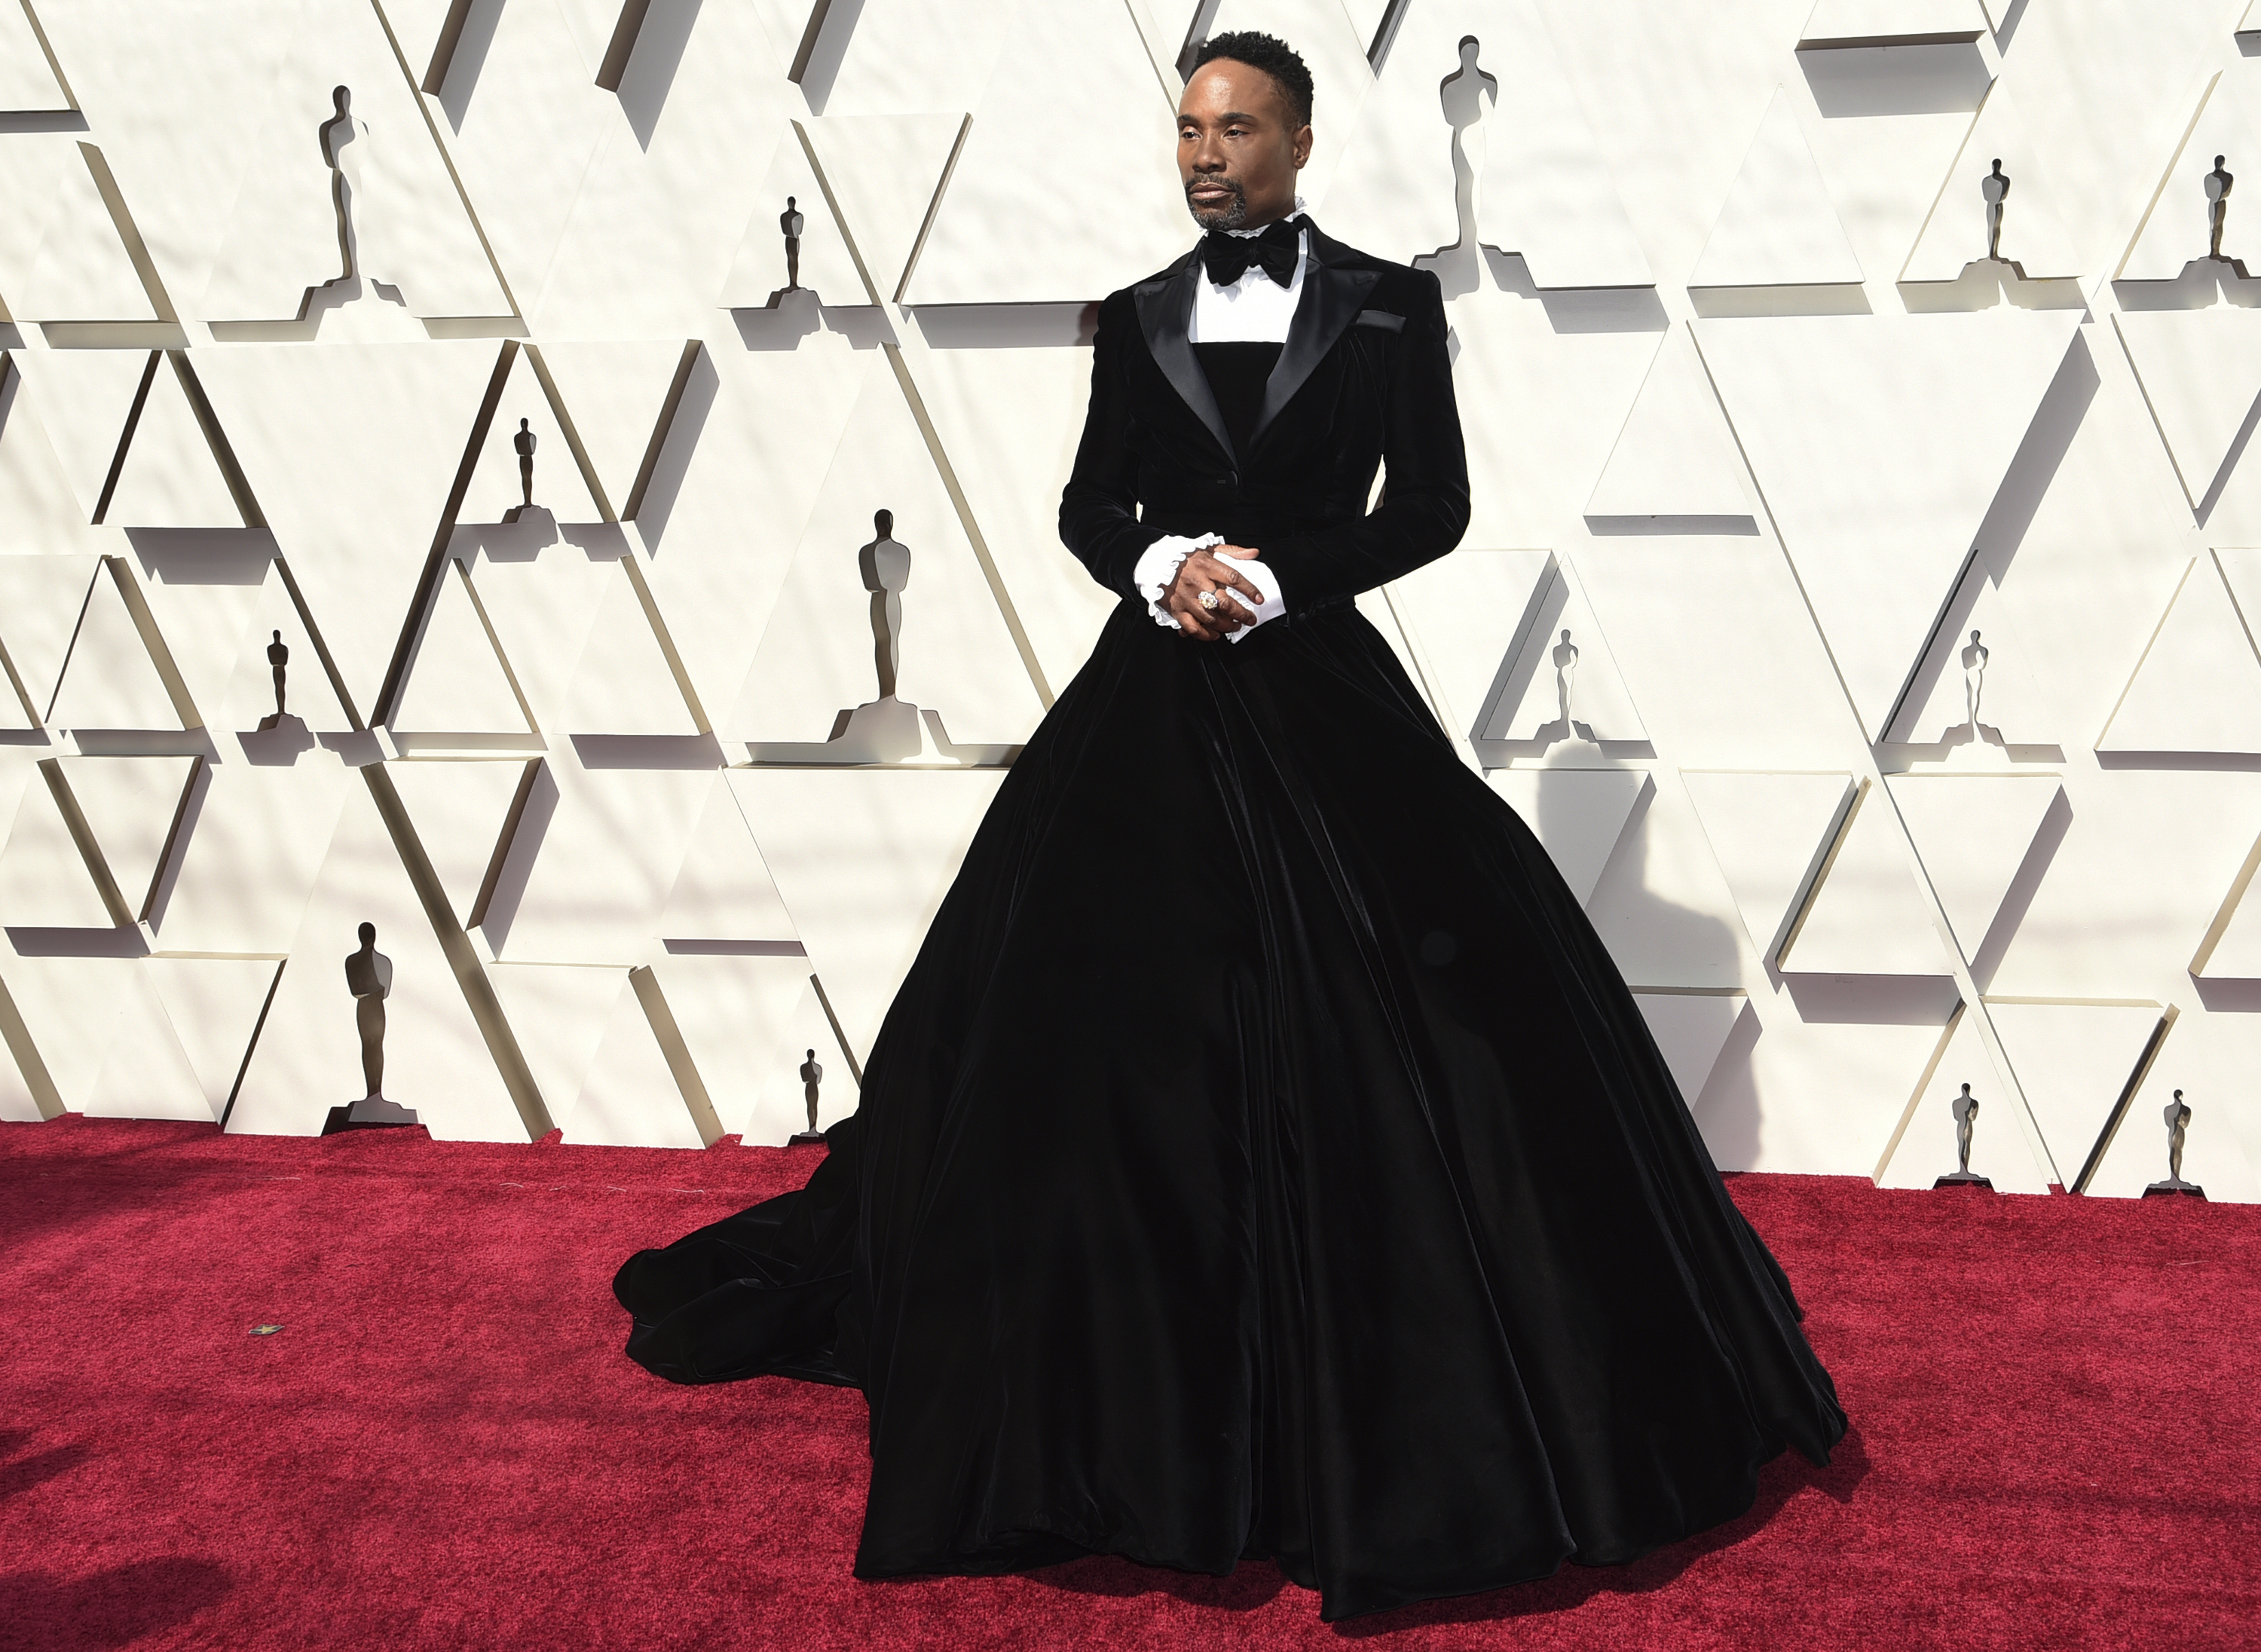 Red carpet fashion at the Oscars 2019 